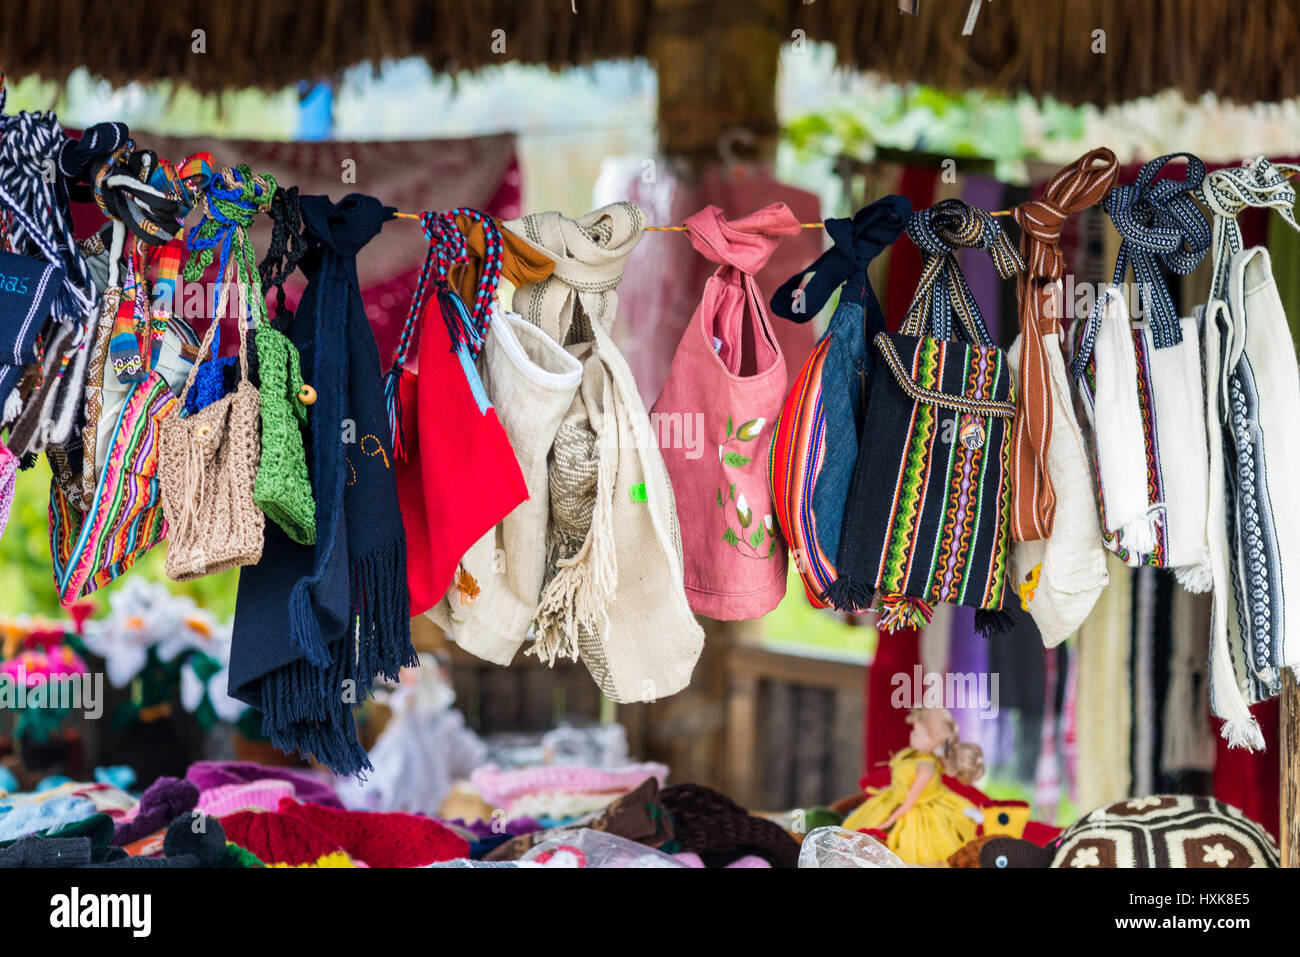 Colorful hand-made tote bags for sale at a souvenir shop in Northern Peru. Stock Photo